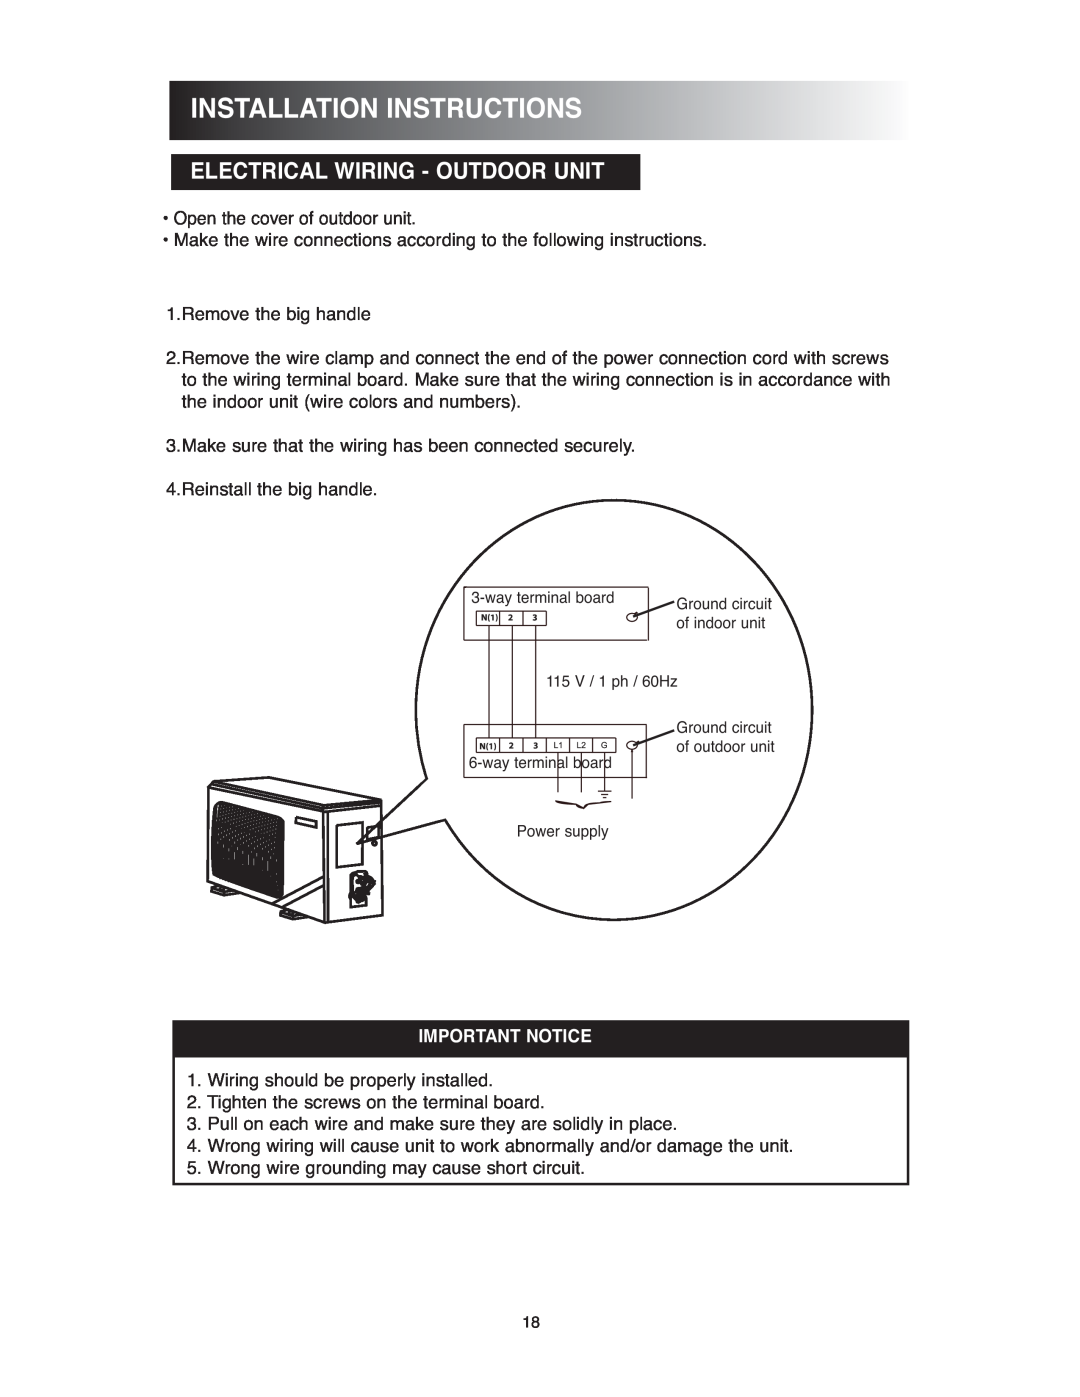 Sunrise Global 13-05020, 13-05024 owner manual Electrical Wiring - Outdoor Unit, Installationinstructions, Important Notice 